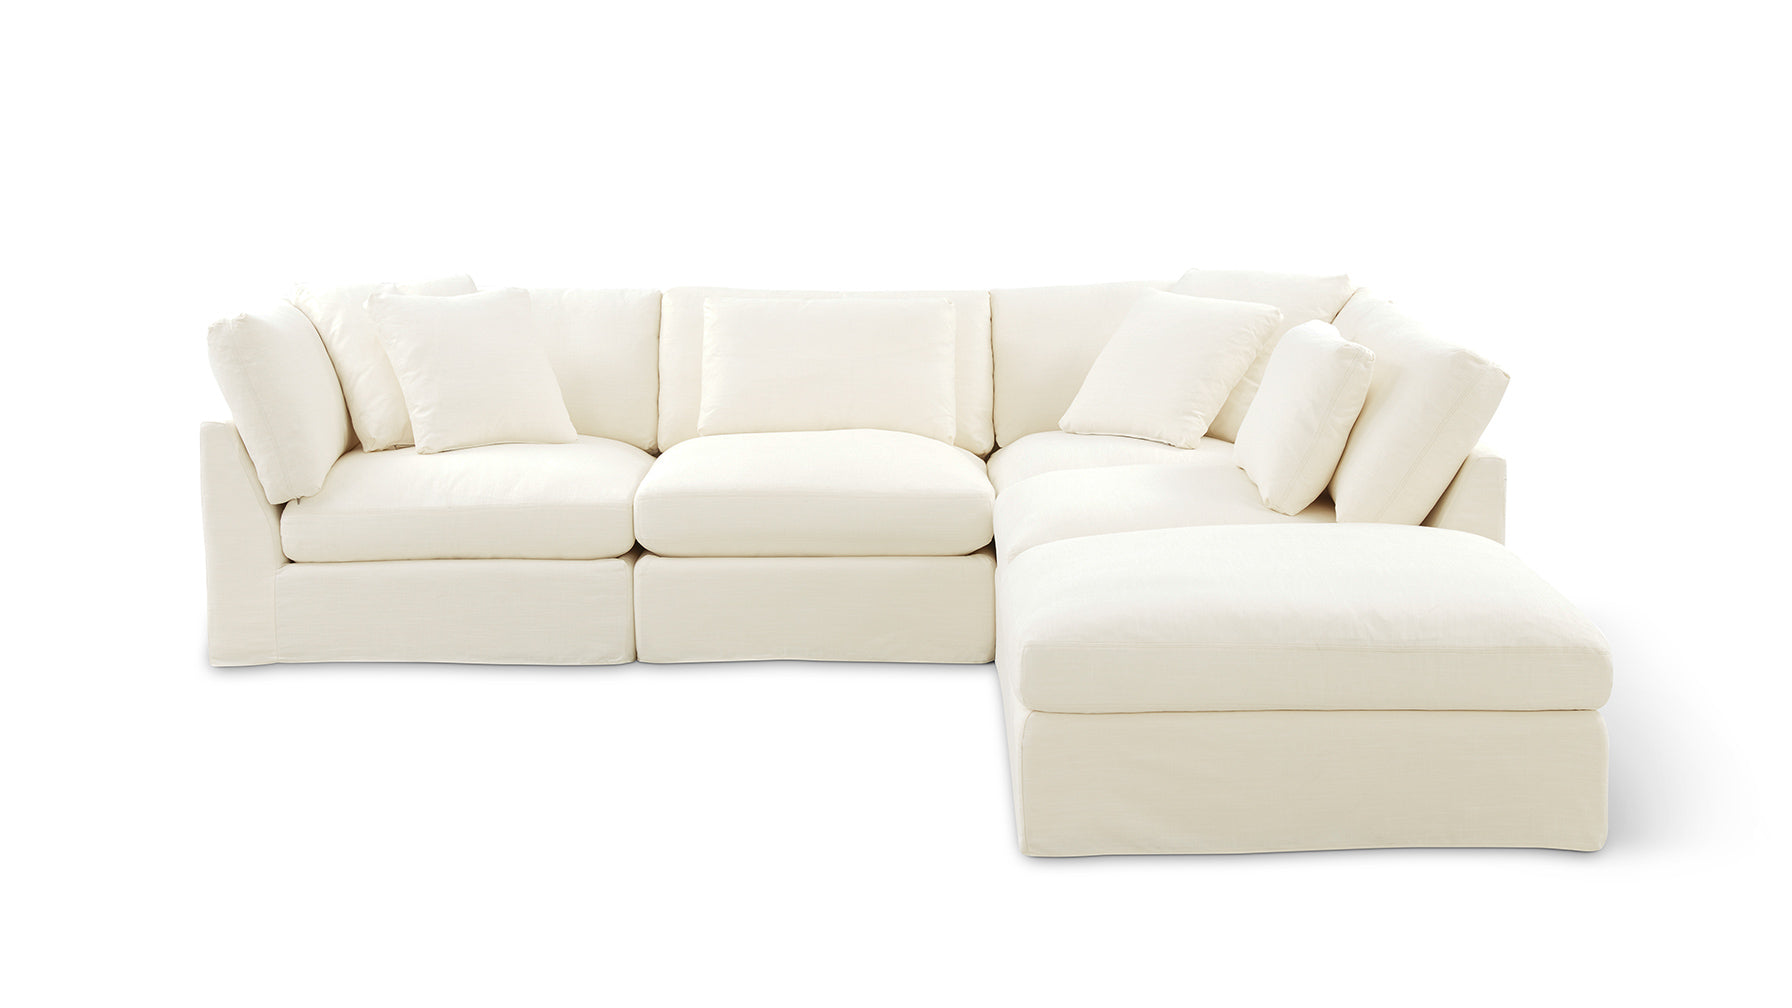 Get Together™ 5-Piece Modular Sectional, Large, Cream Linen - Image 1